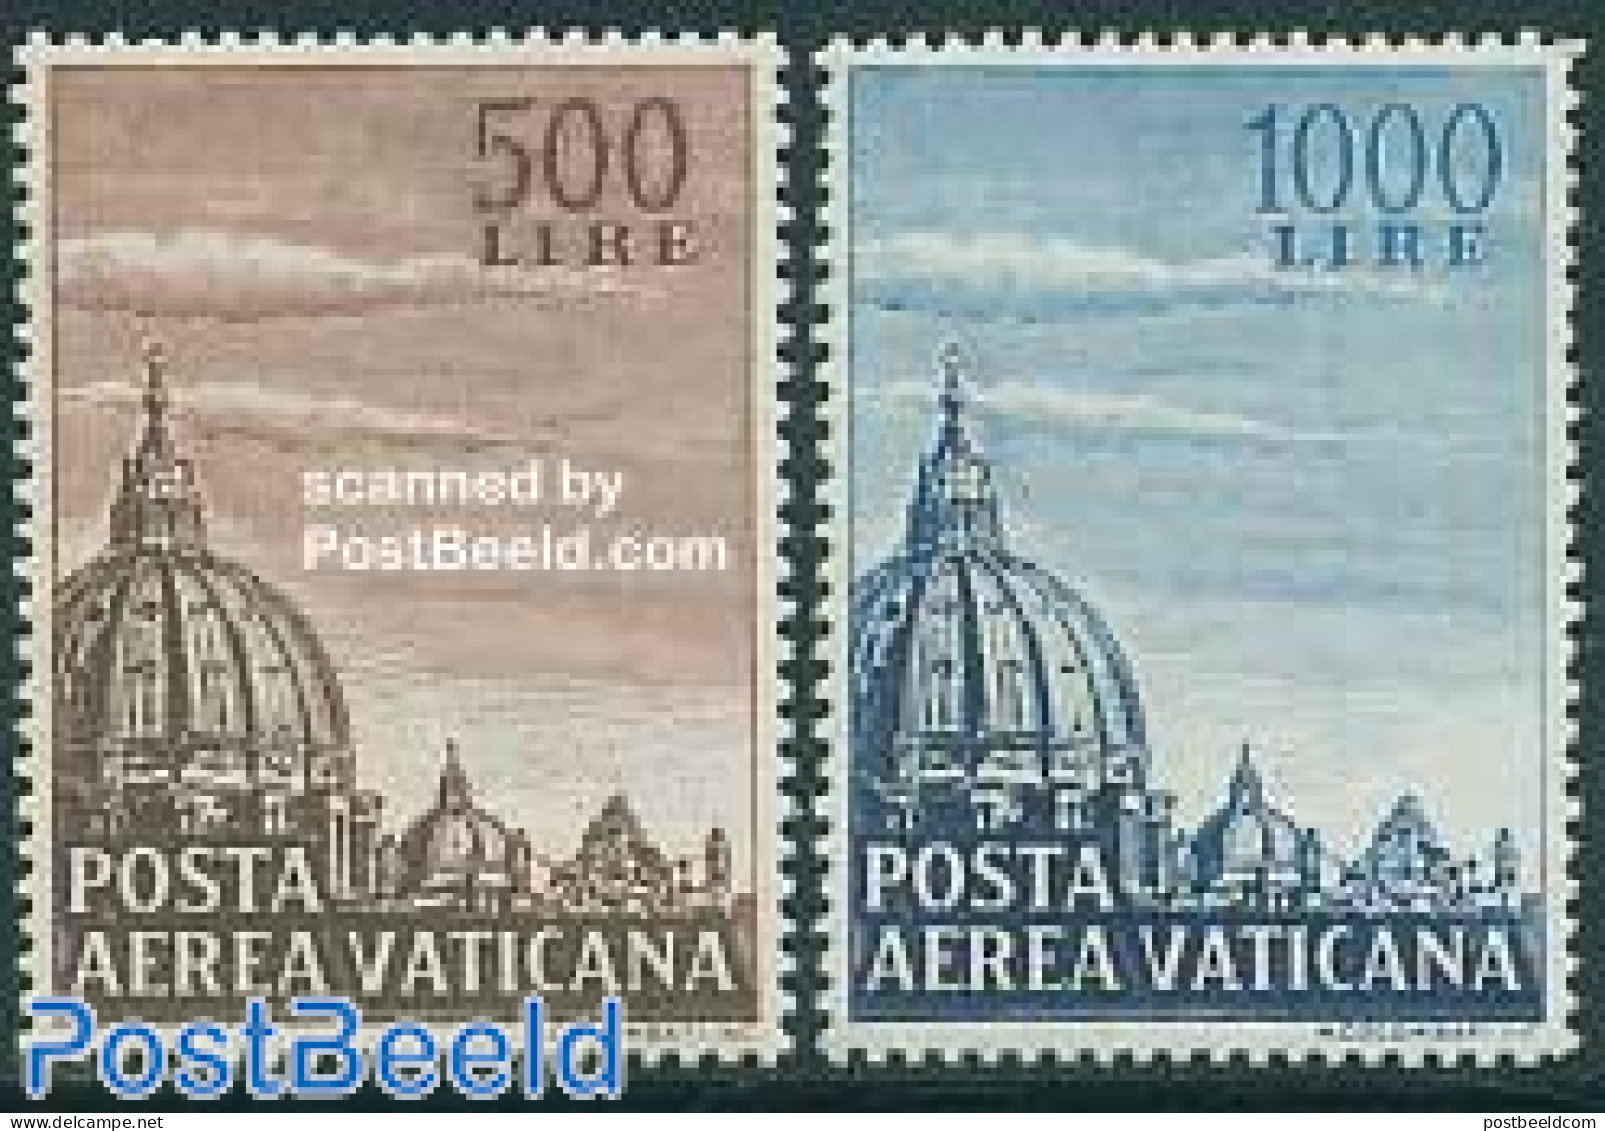 Vatican 1953 Airmail Definitives 2v, Unused (hinged), Religion - Churches, Temples, Mosques, Synagogues - Ungebraucht